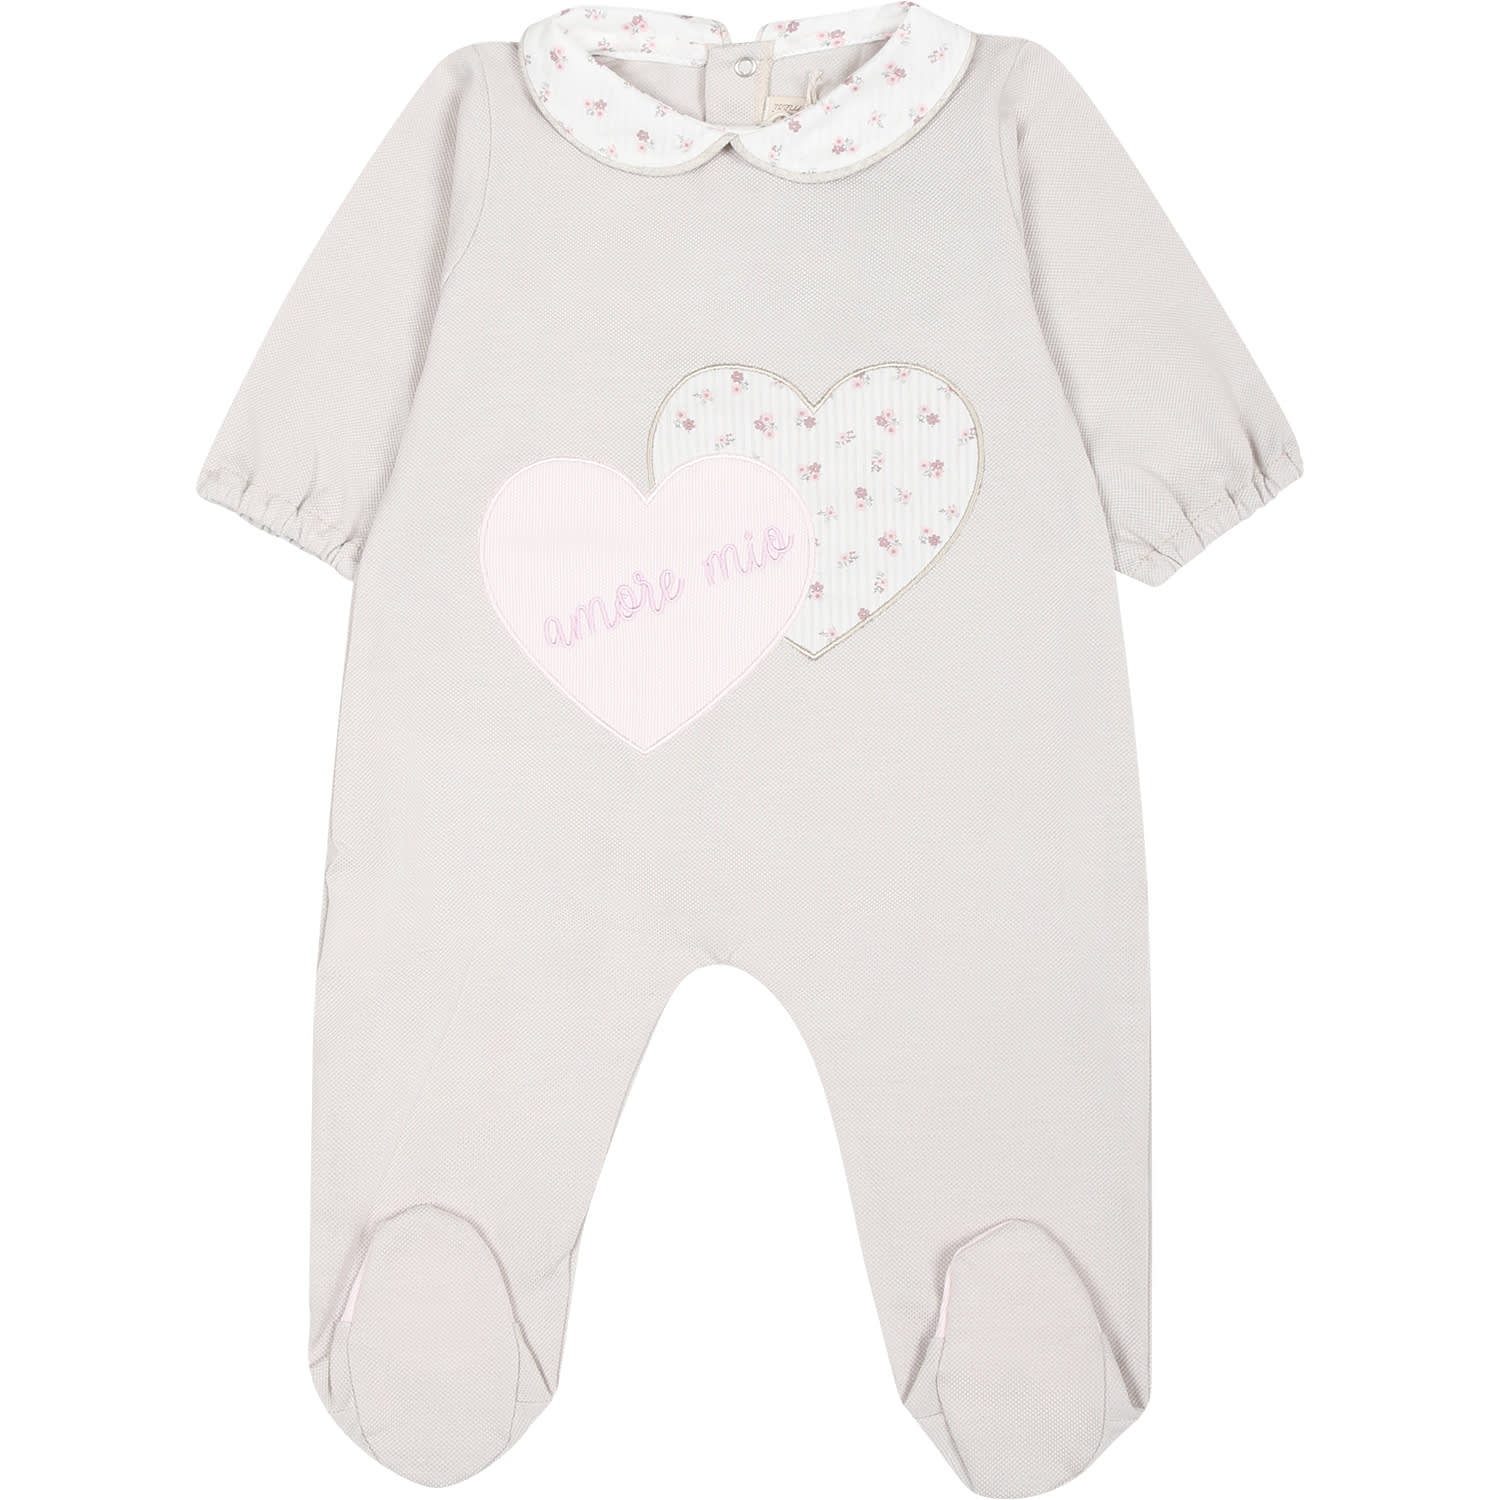 Shop La Stupenderia Beige Babygrow For Baby Girl With Hearts And Writing